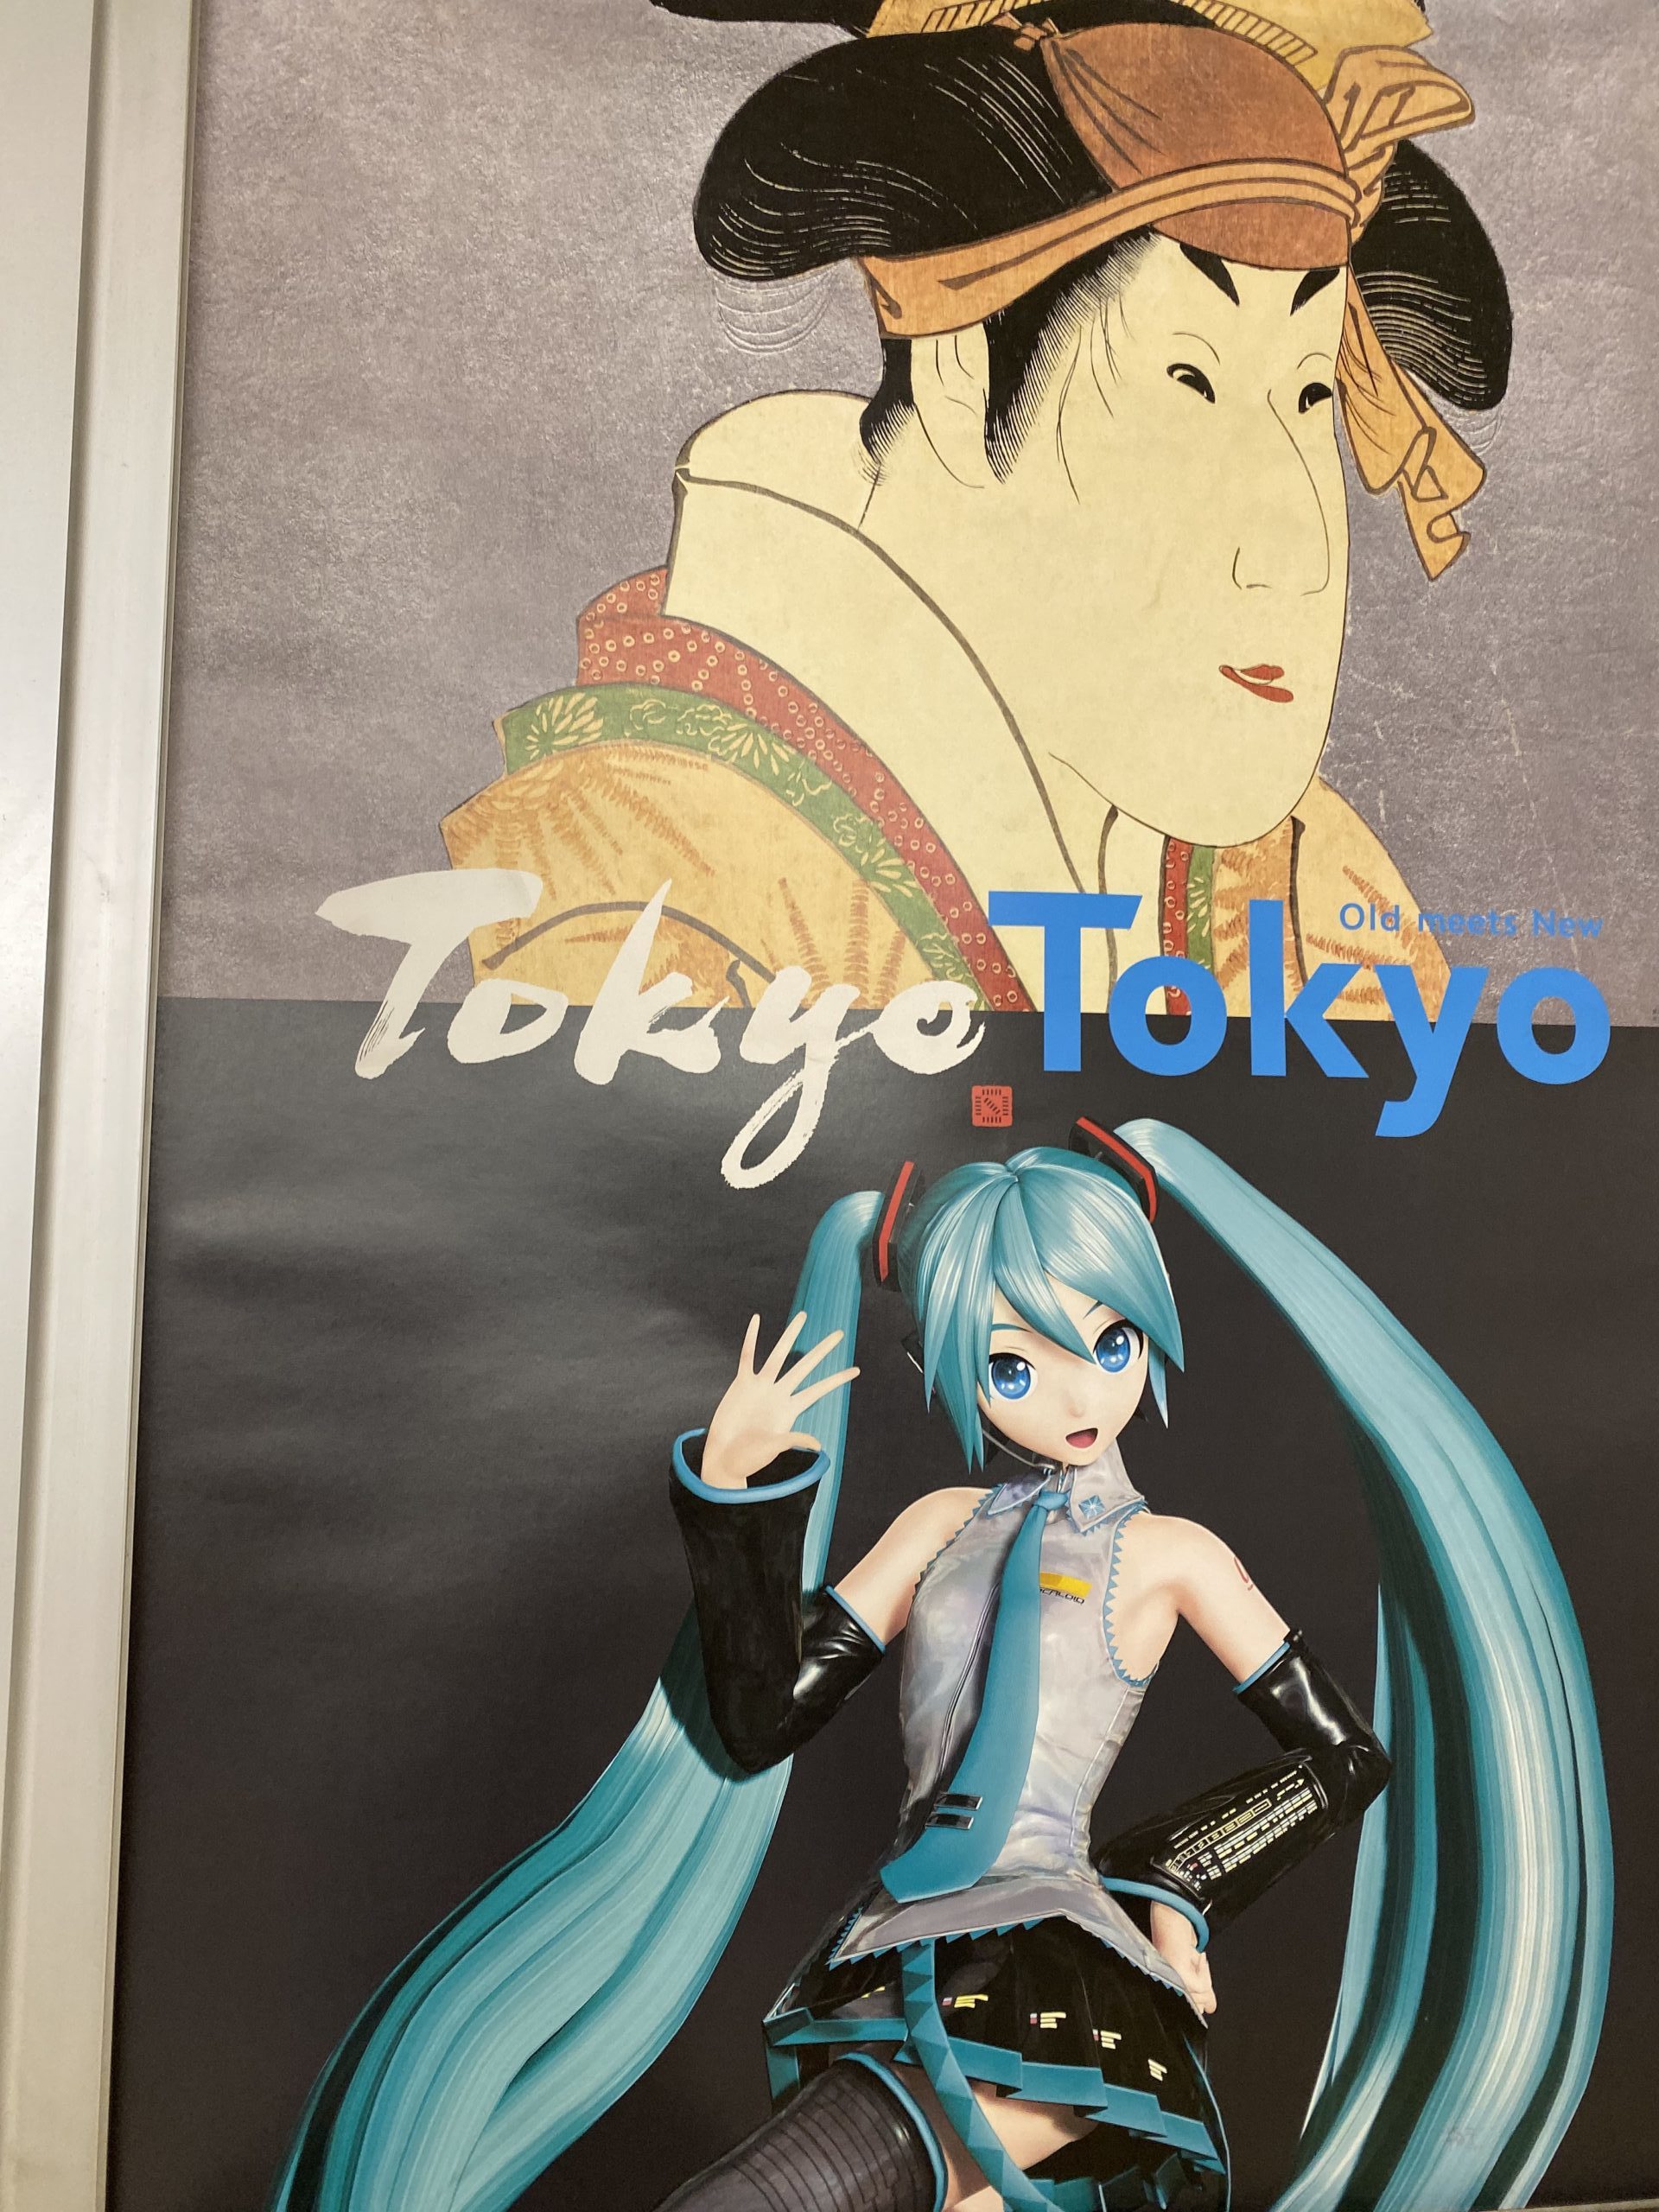 Advertising poster of "Tokyo" posted in Higashi-ginza station, Tokyo 